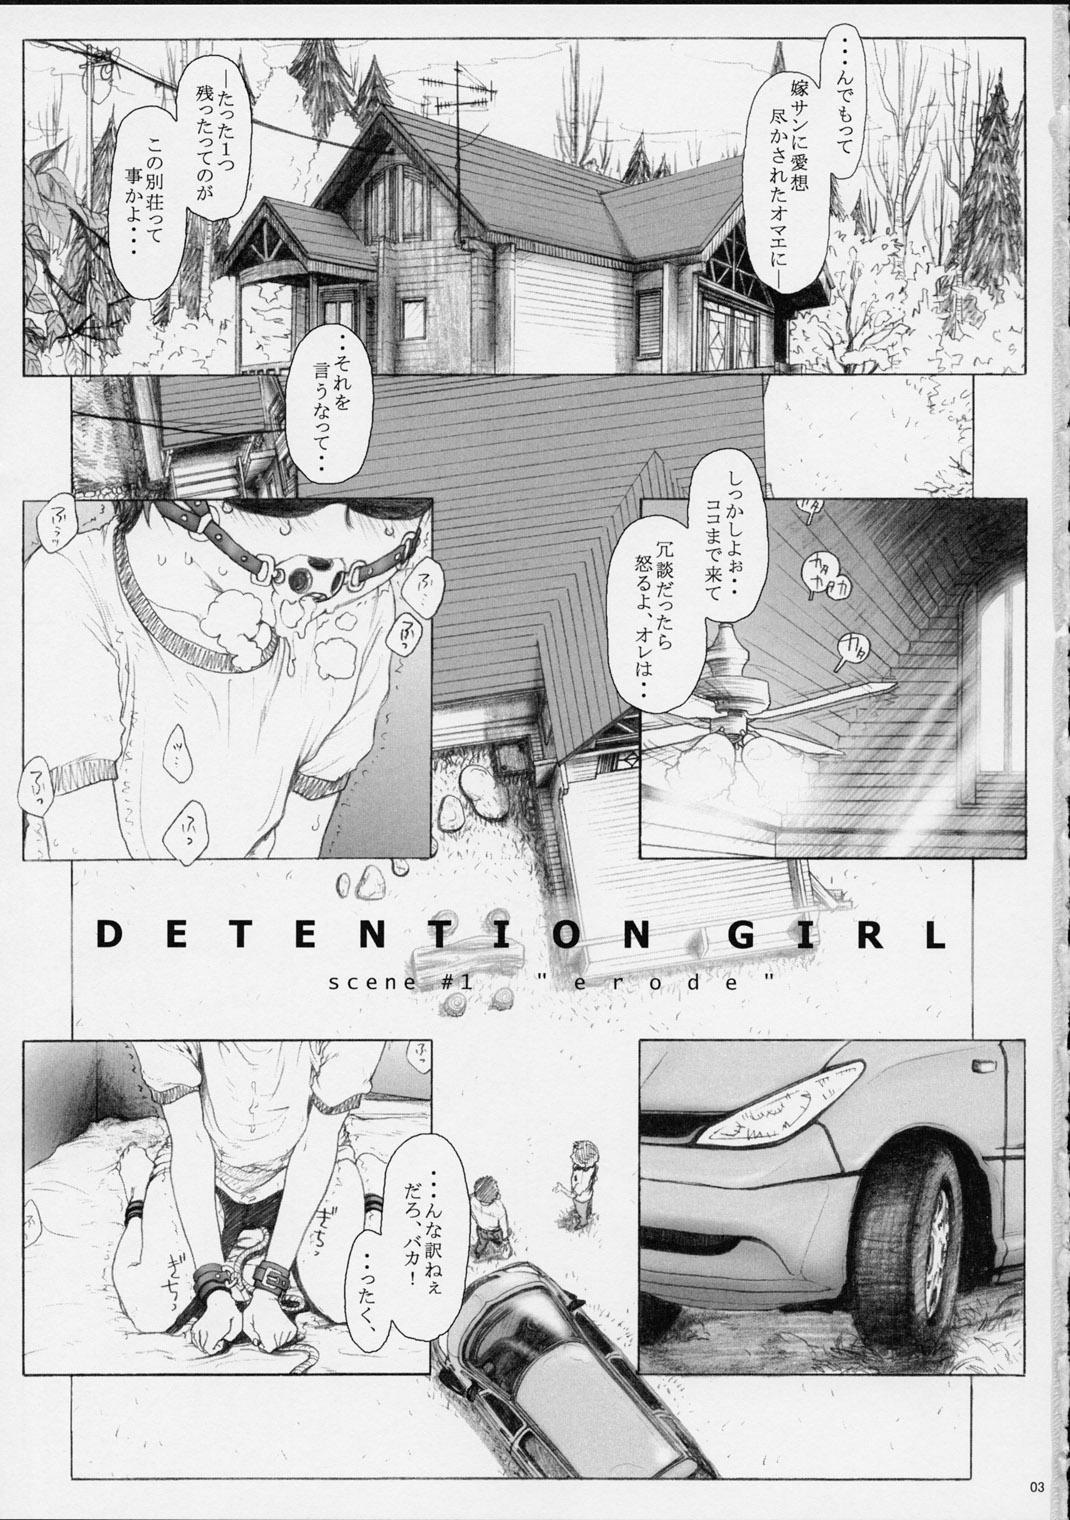 Gayclips Koukin Shoujo 1 - Detention Girl 1 All - Picture 2